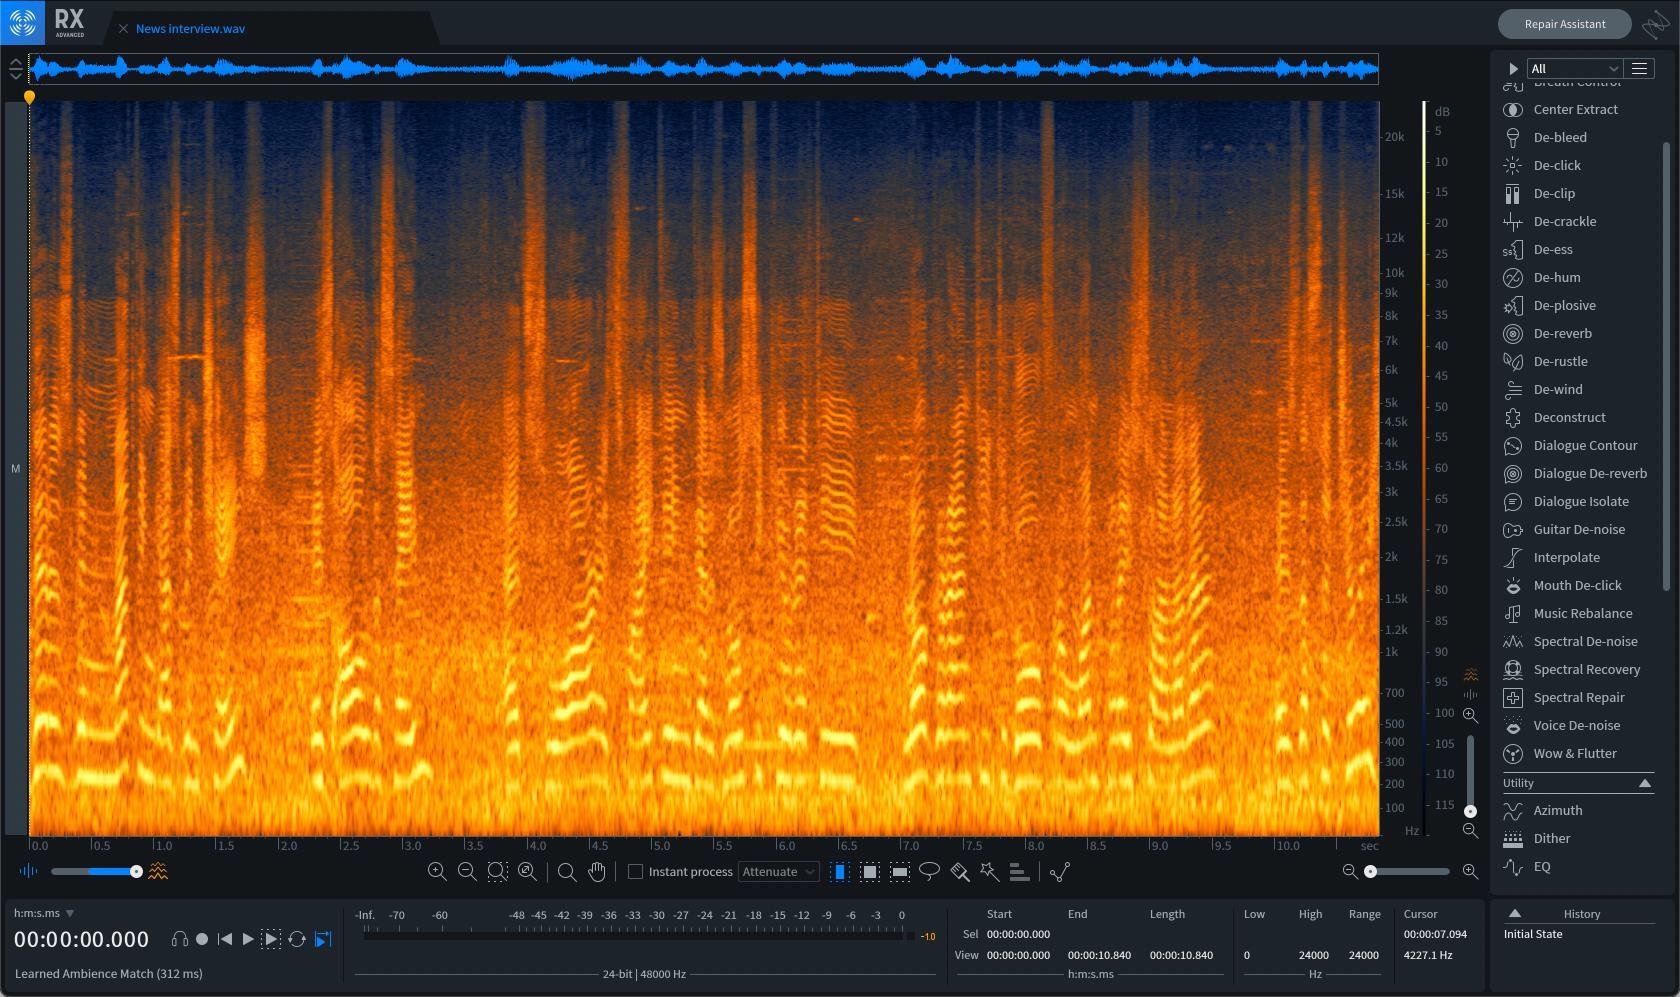 studio one pro 3 problems with izotope rx 6